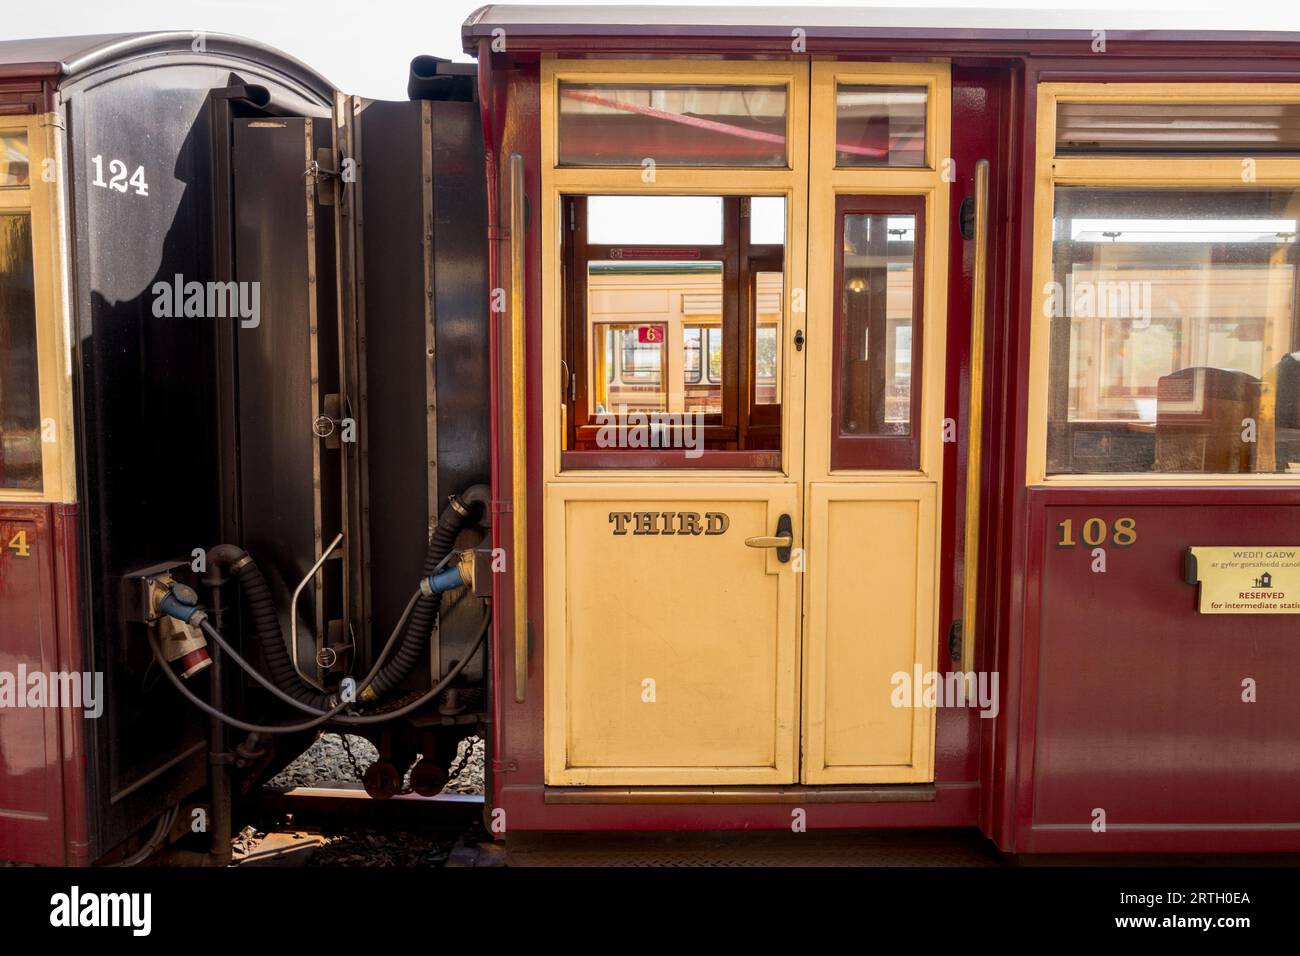 Third class carriages used by the Ffestiniog Railway and Welsh Highland Railway to transport passenger from Porthmadoc station. Stock Photo